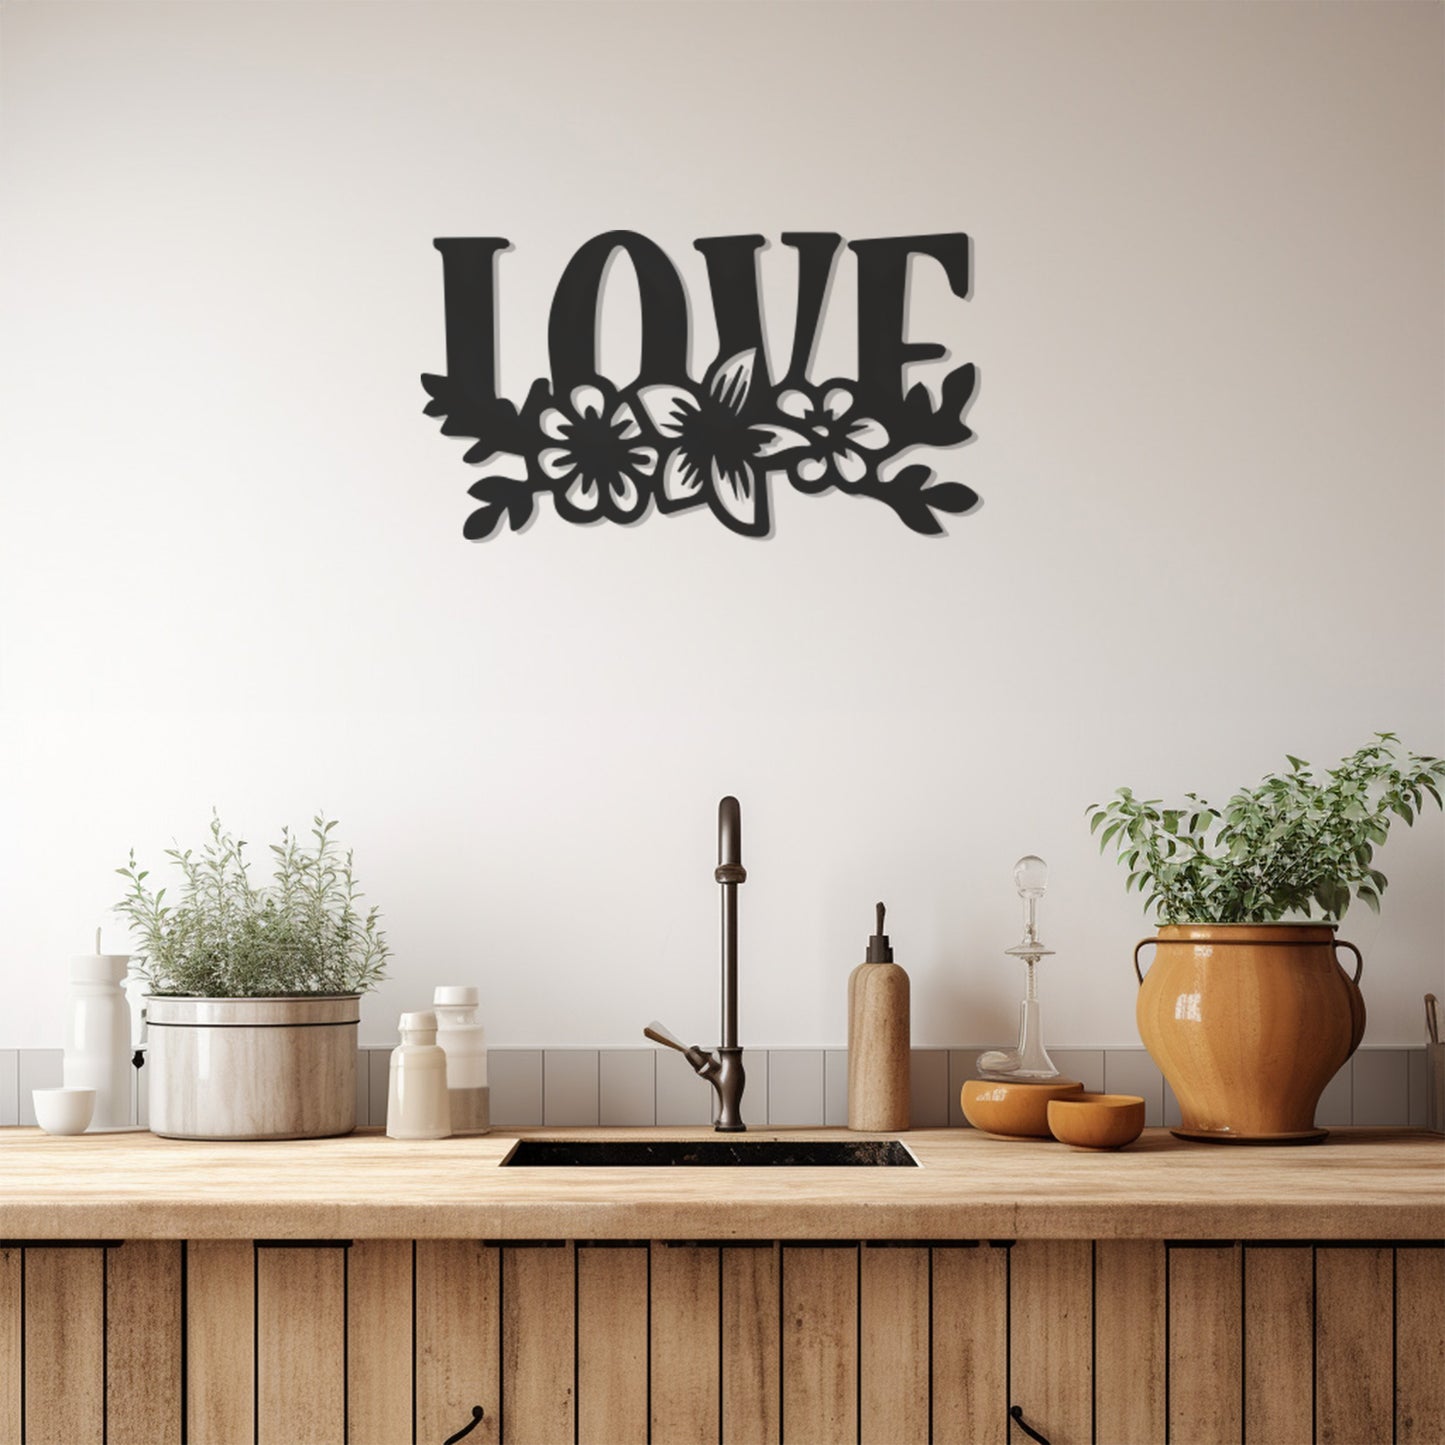 Love Lettering Metal Wall Decor With Flowers Underneath